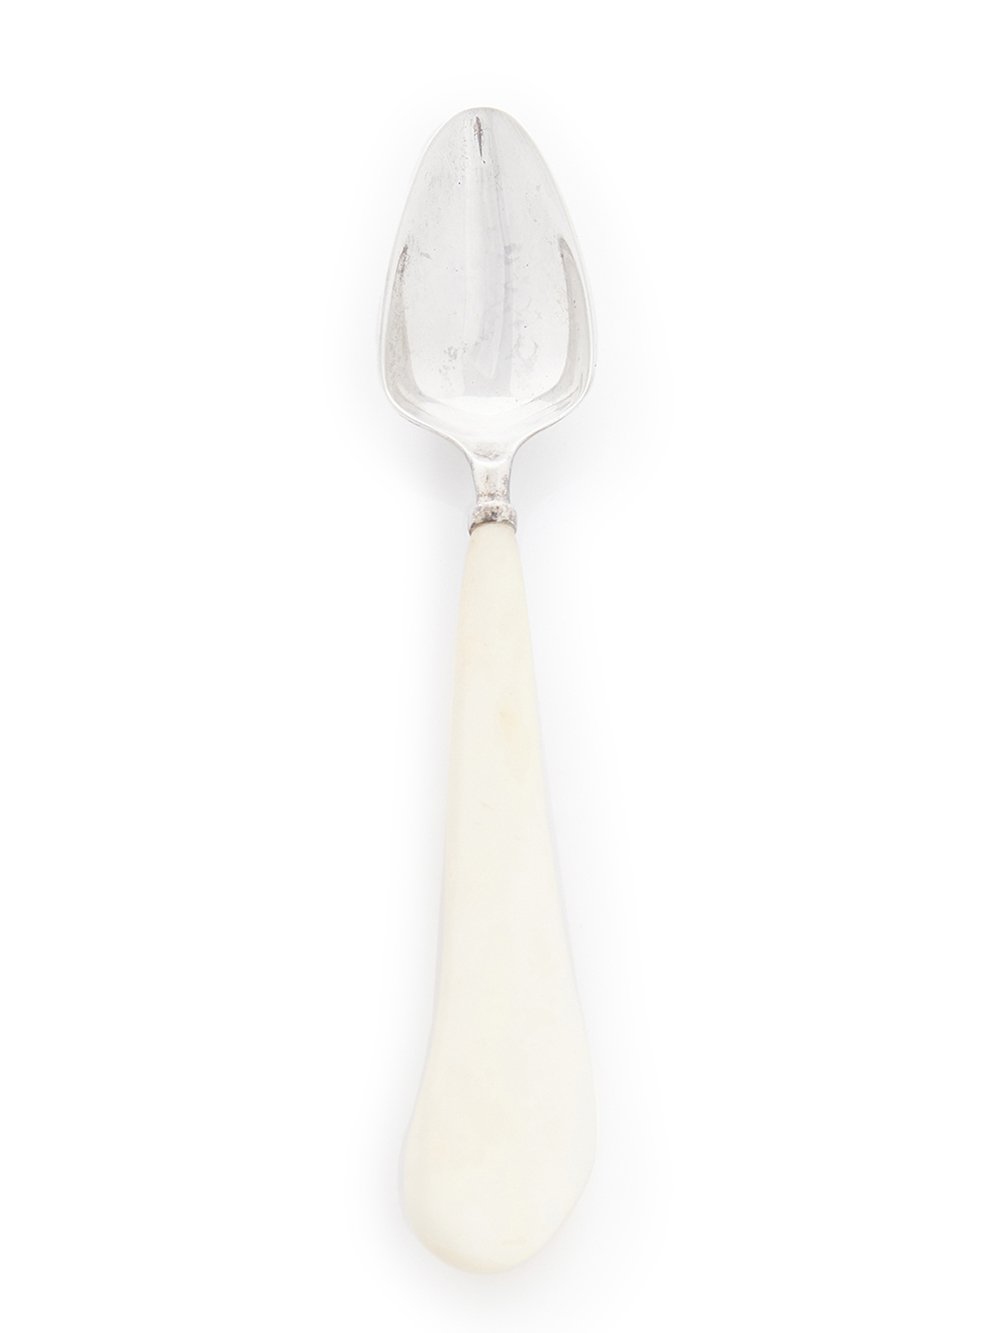 RICK OWENS SALAD SPOON FEATURES A BIG OVAL SHAPE STERLING TOP, AND A LONG, NATURAL COLOR BONE HANDLE.